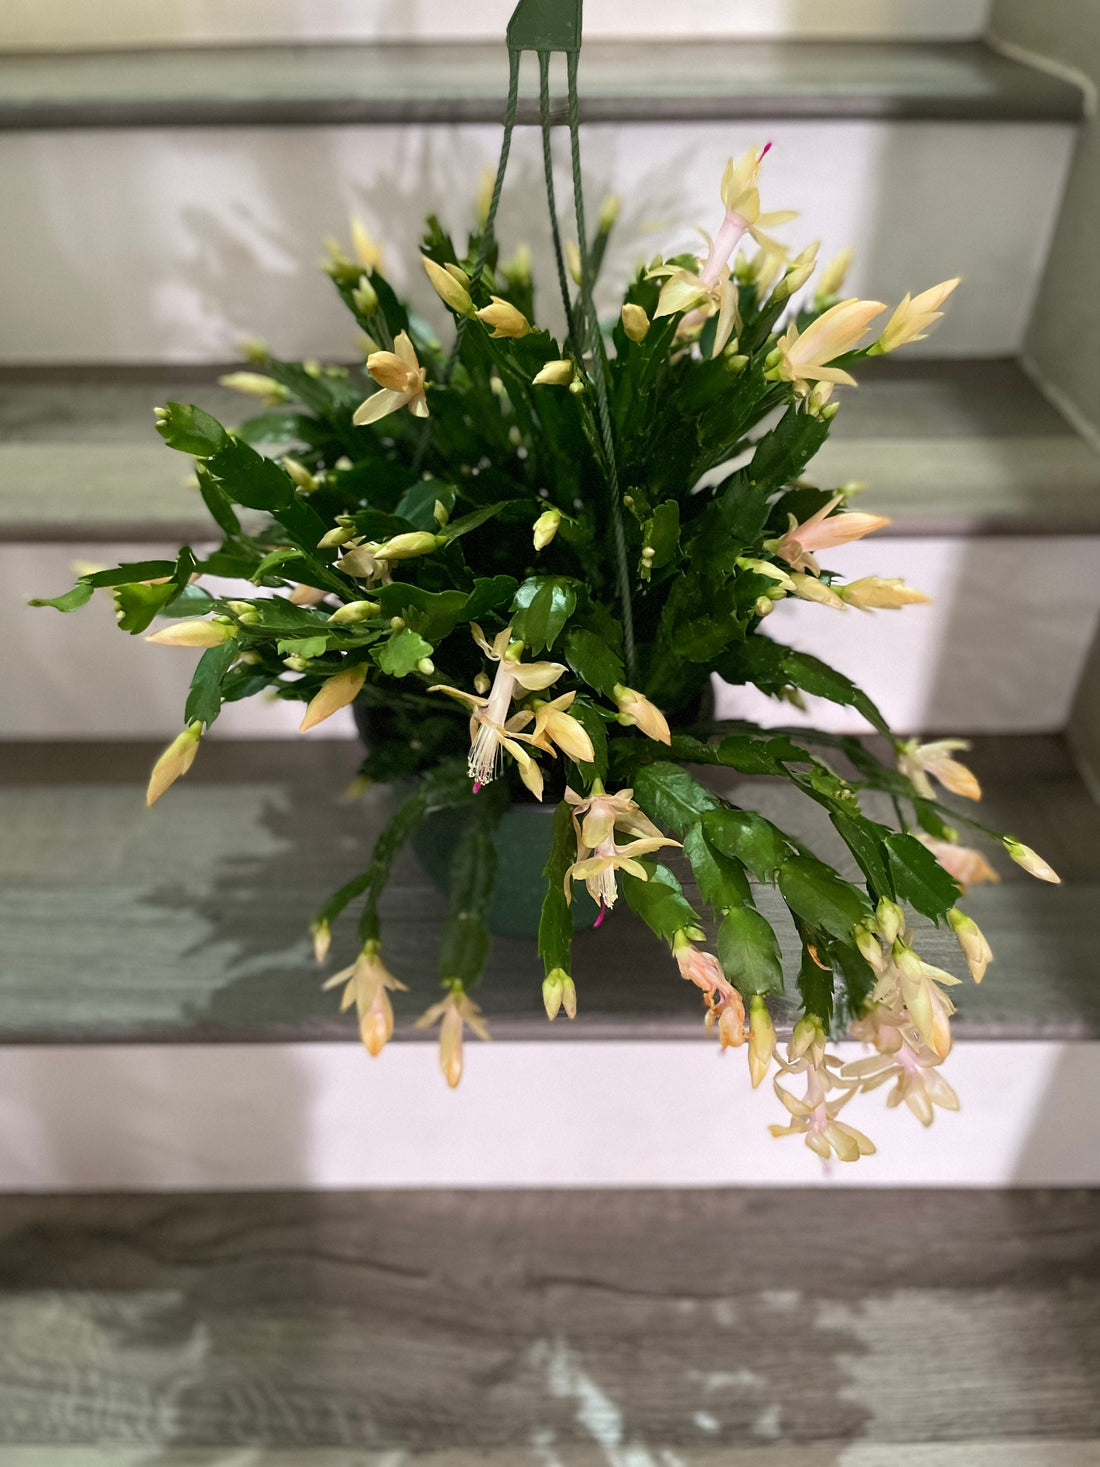 XXL 8 inch  pot-Schlumbergera truncata -Holiday  Cactus - yellow flowers -lime light dancer -rare hard to find this size blooming as of 12/4